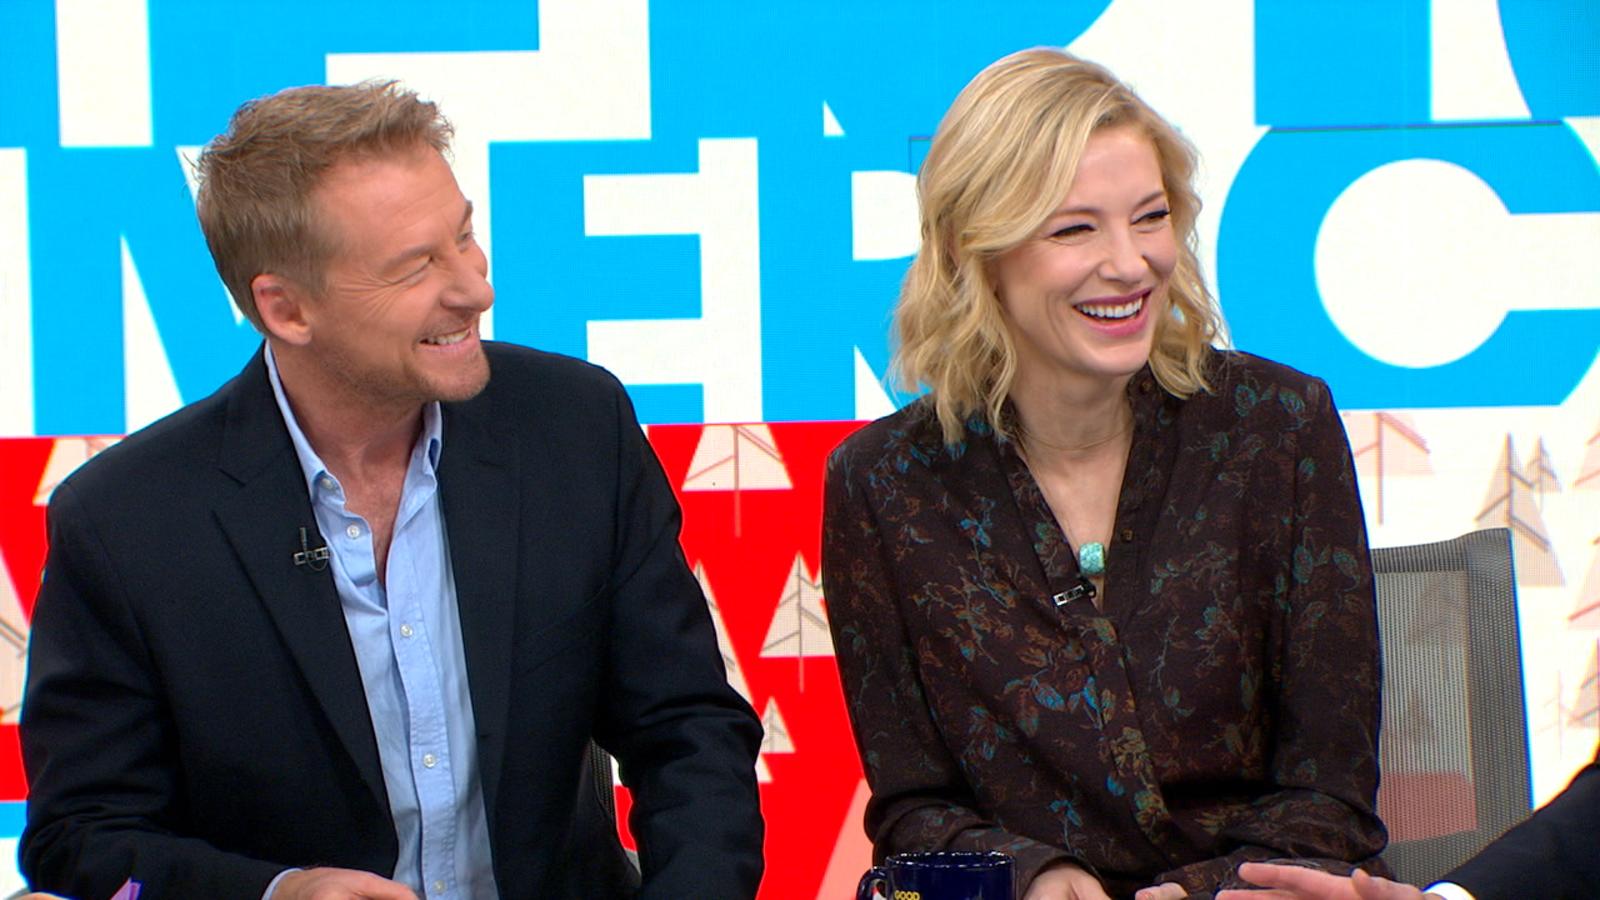 [Video] Cate Blanchett and Richard Roxburgh Talk About The Present on ‘GMA’